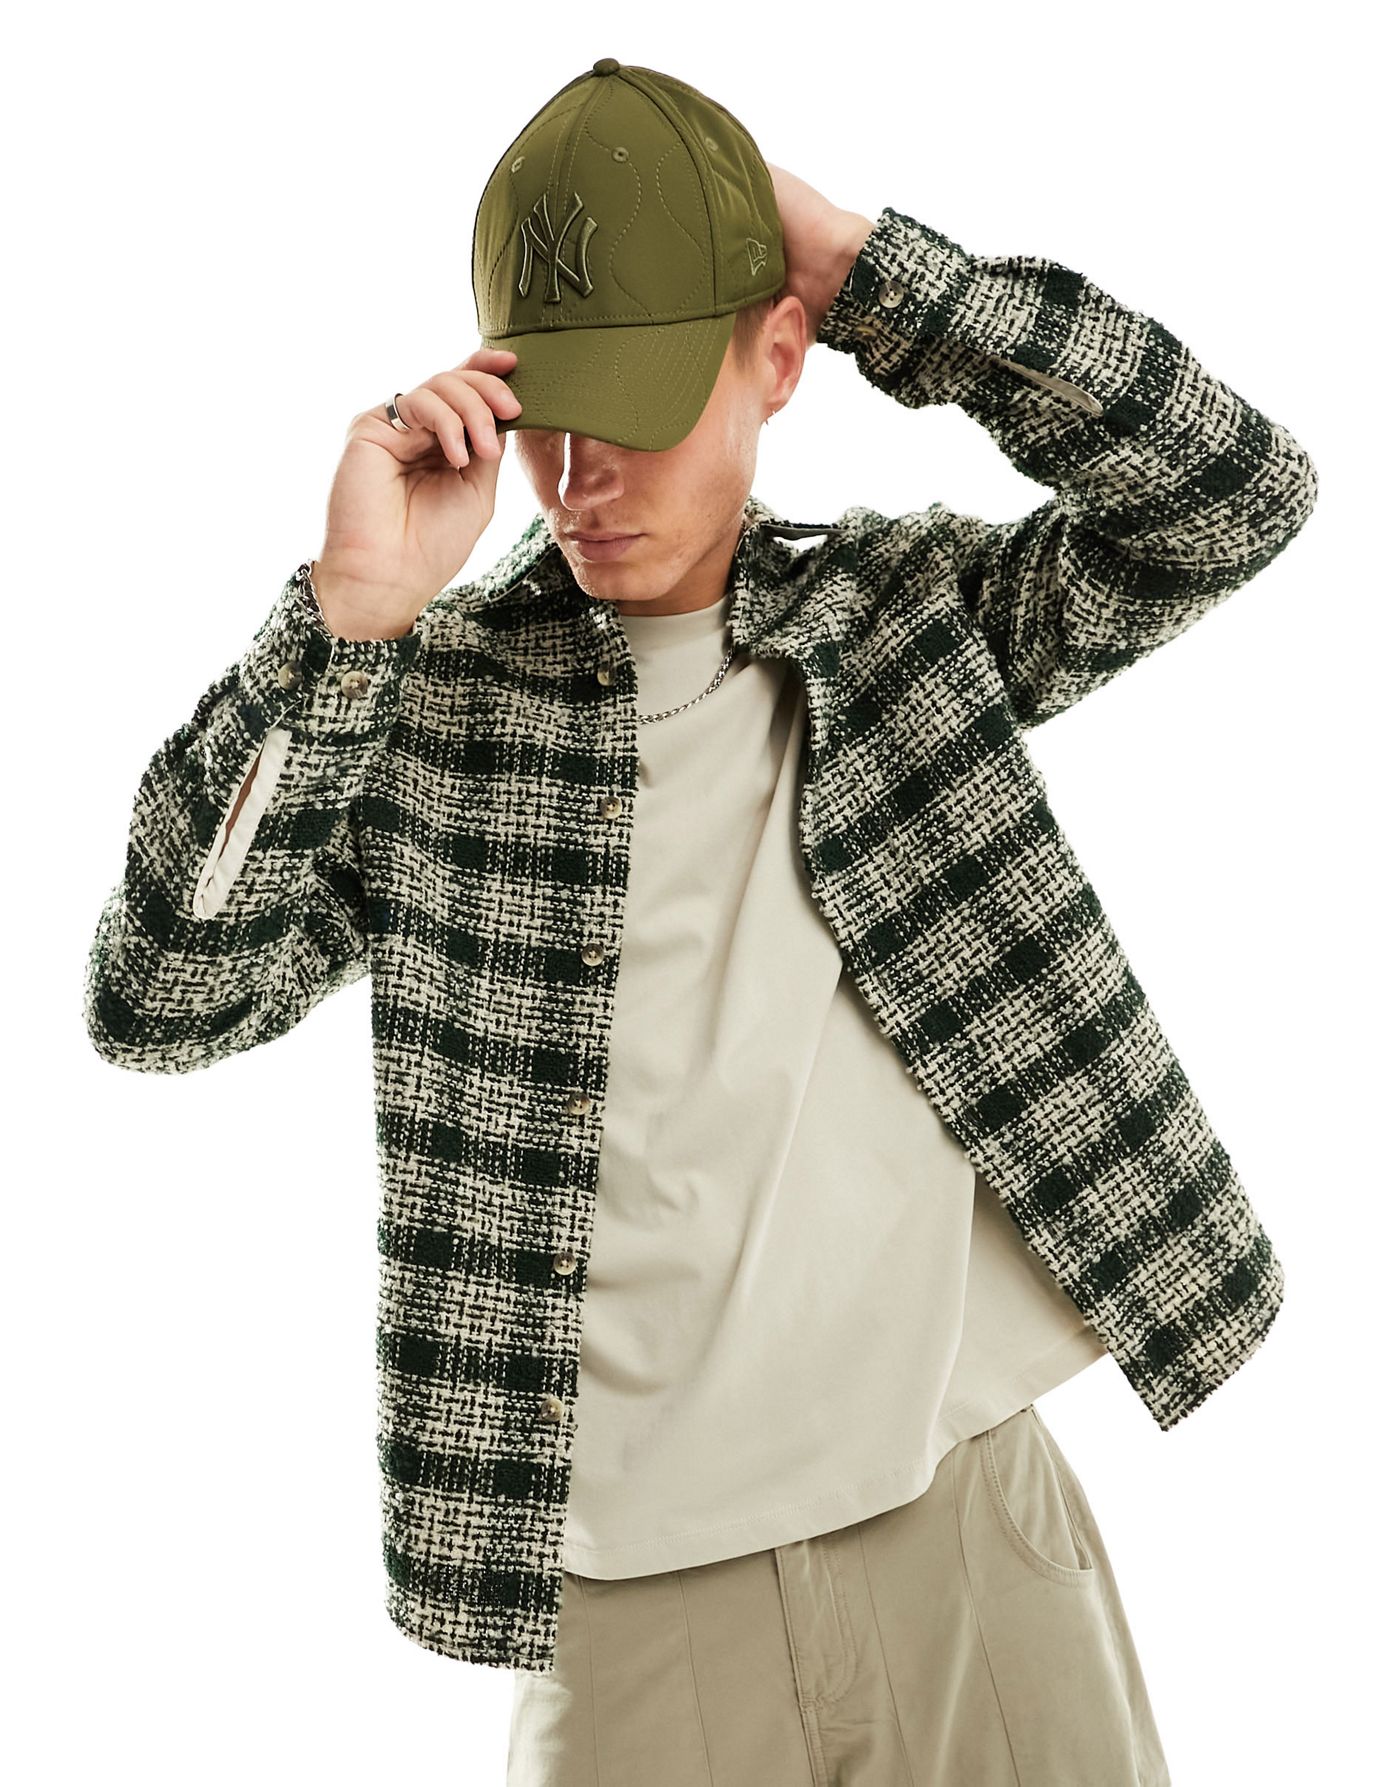 ASOS DESIGN overshirt in boucle textured check in green and ecru